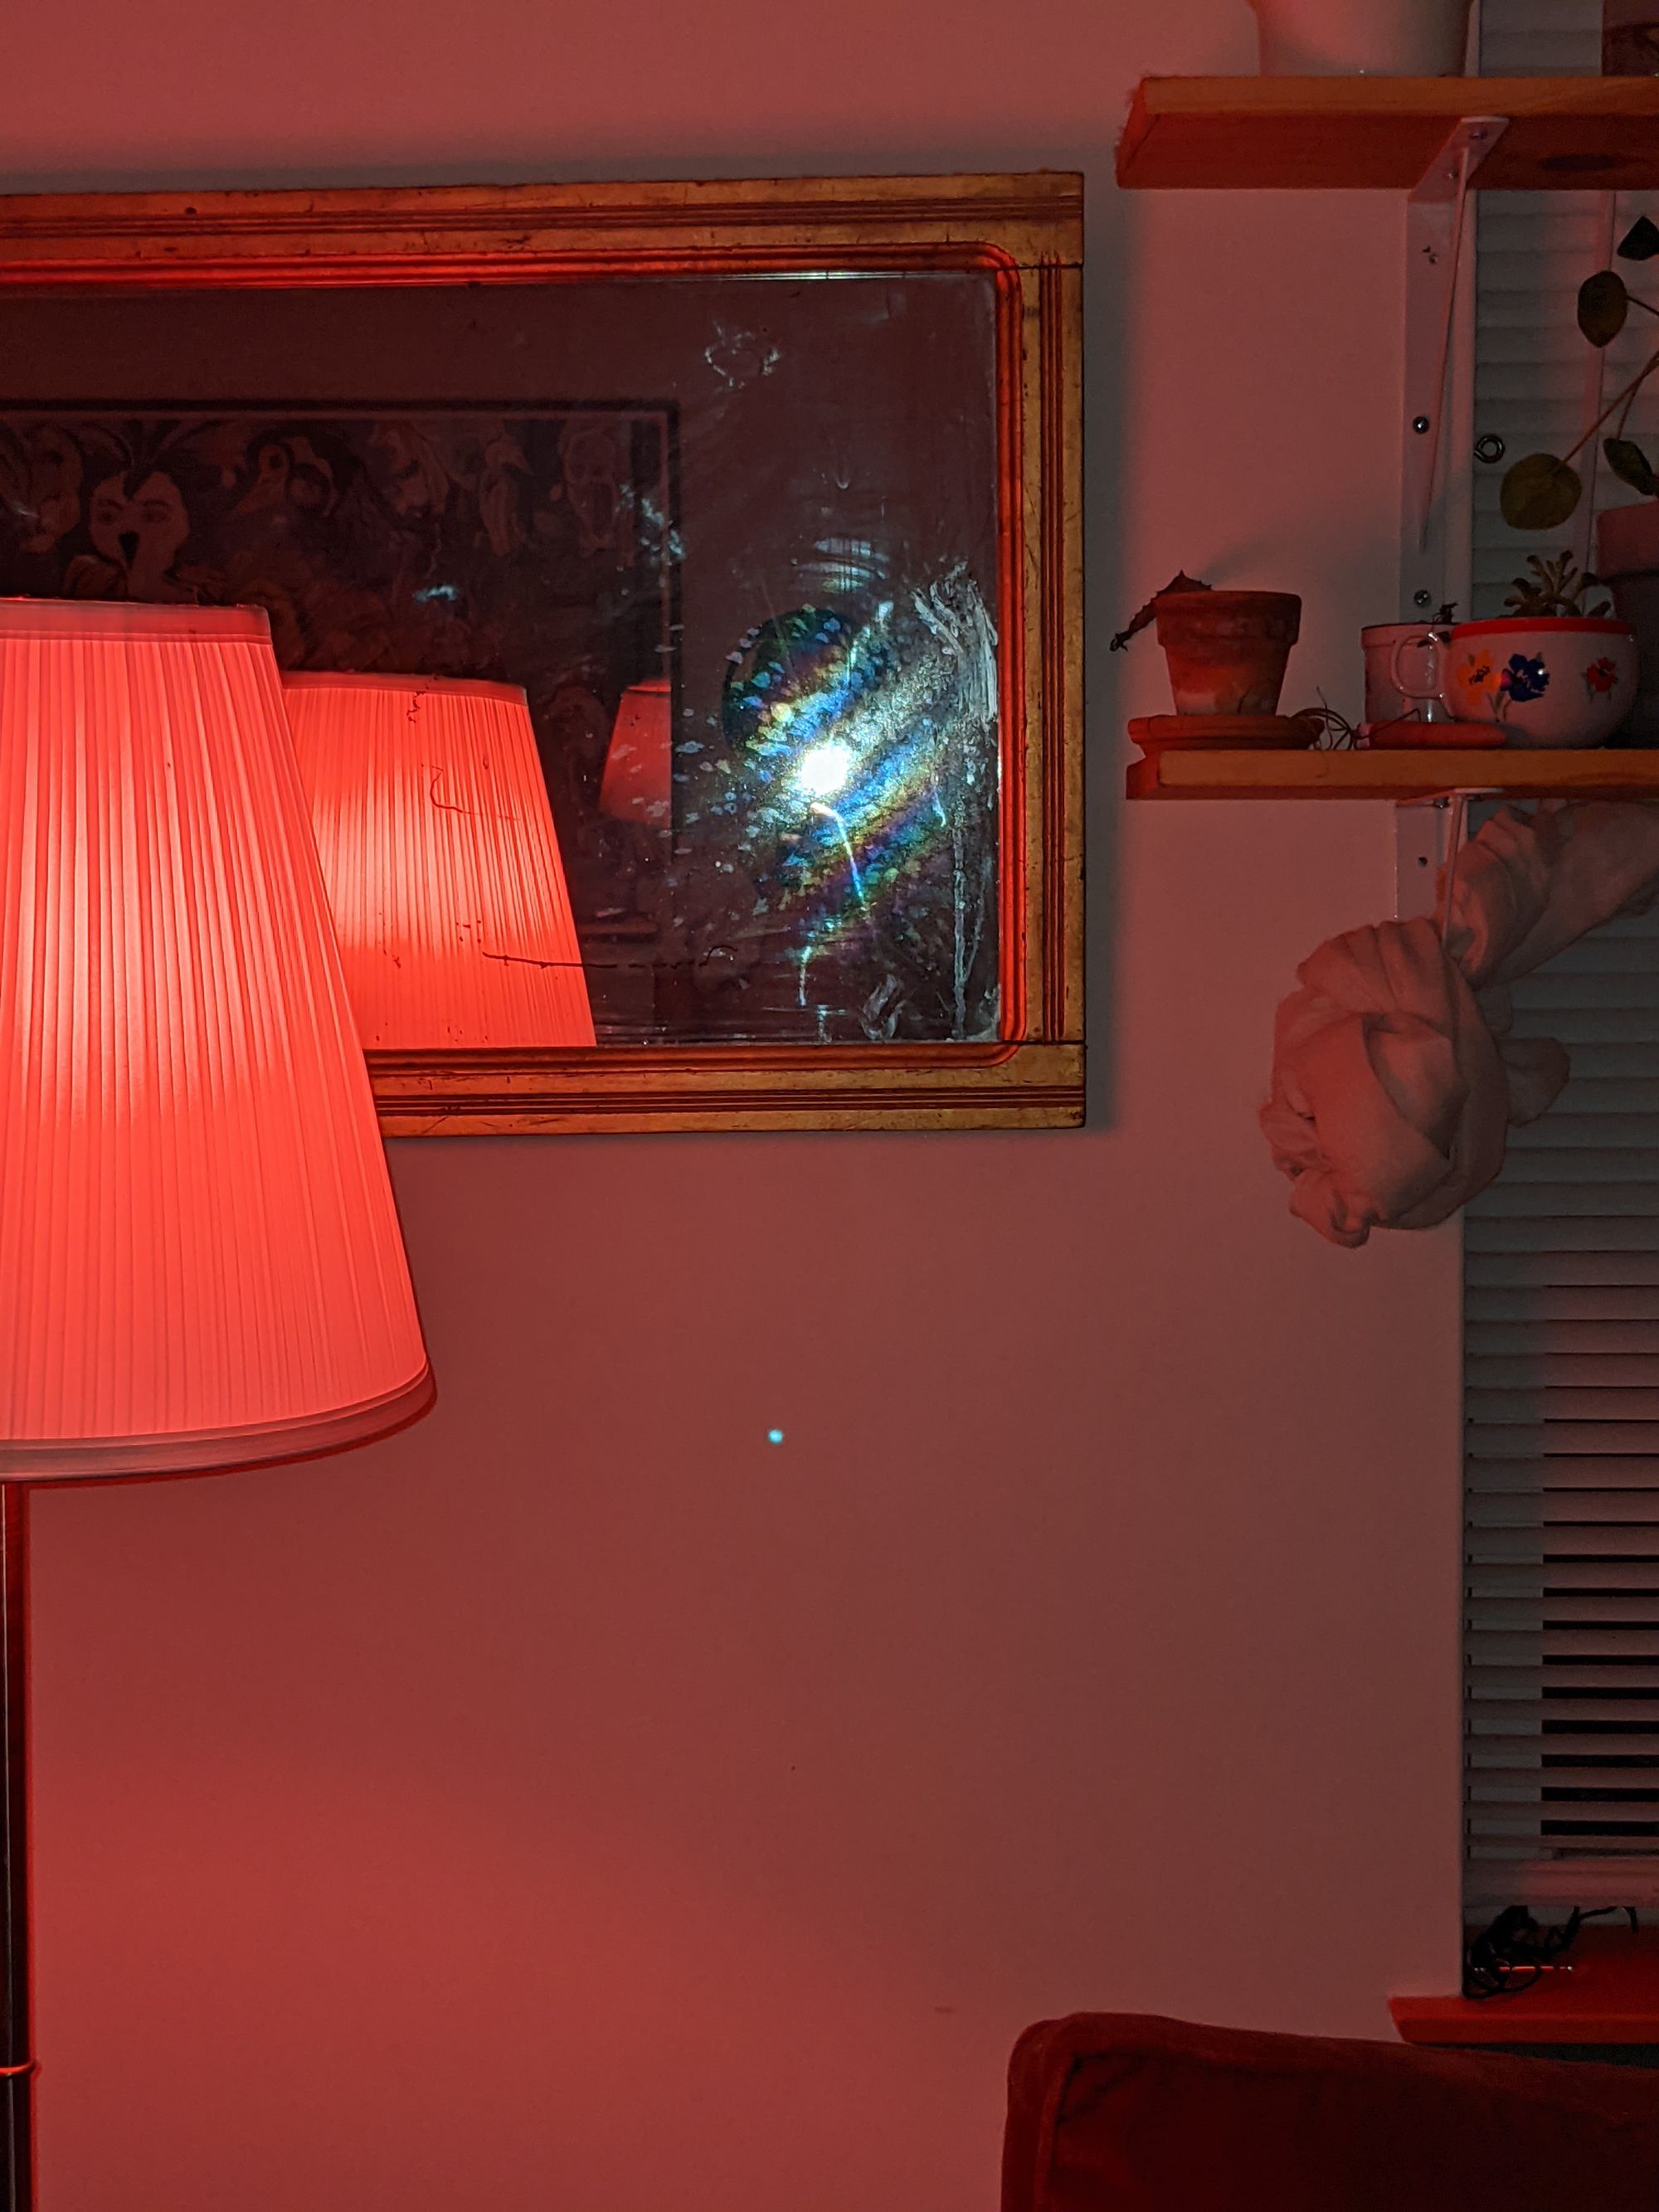 in a mirror on a living room wall, a flash obscures a man taking his own photograph. pink light from a visible lamp dominates the space.